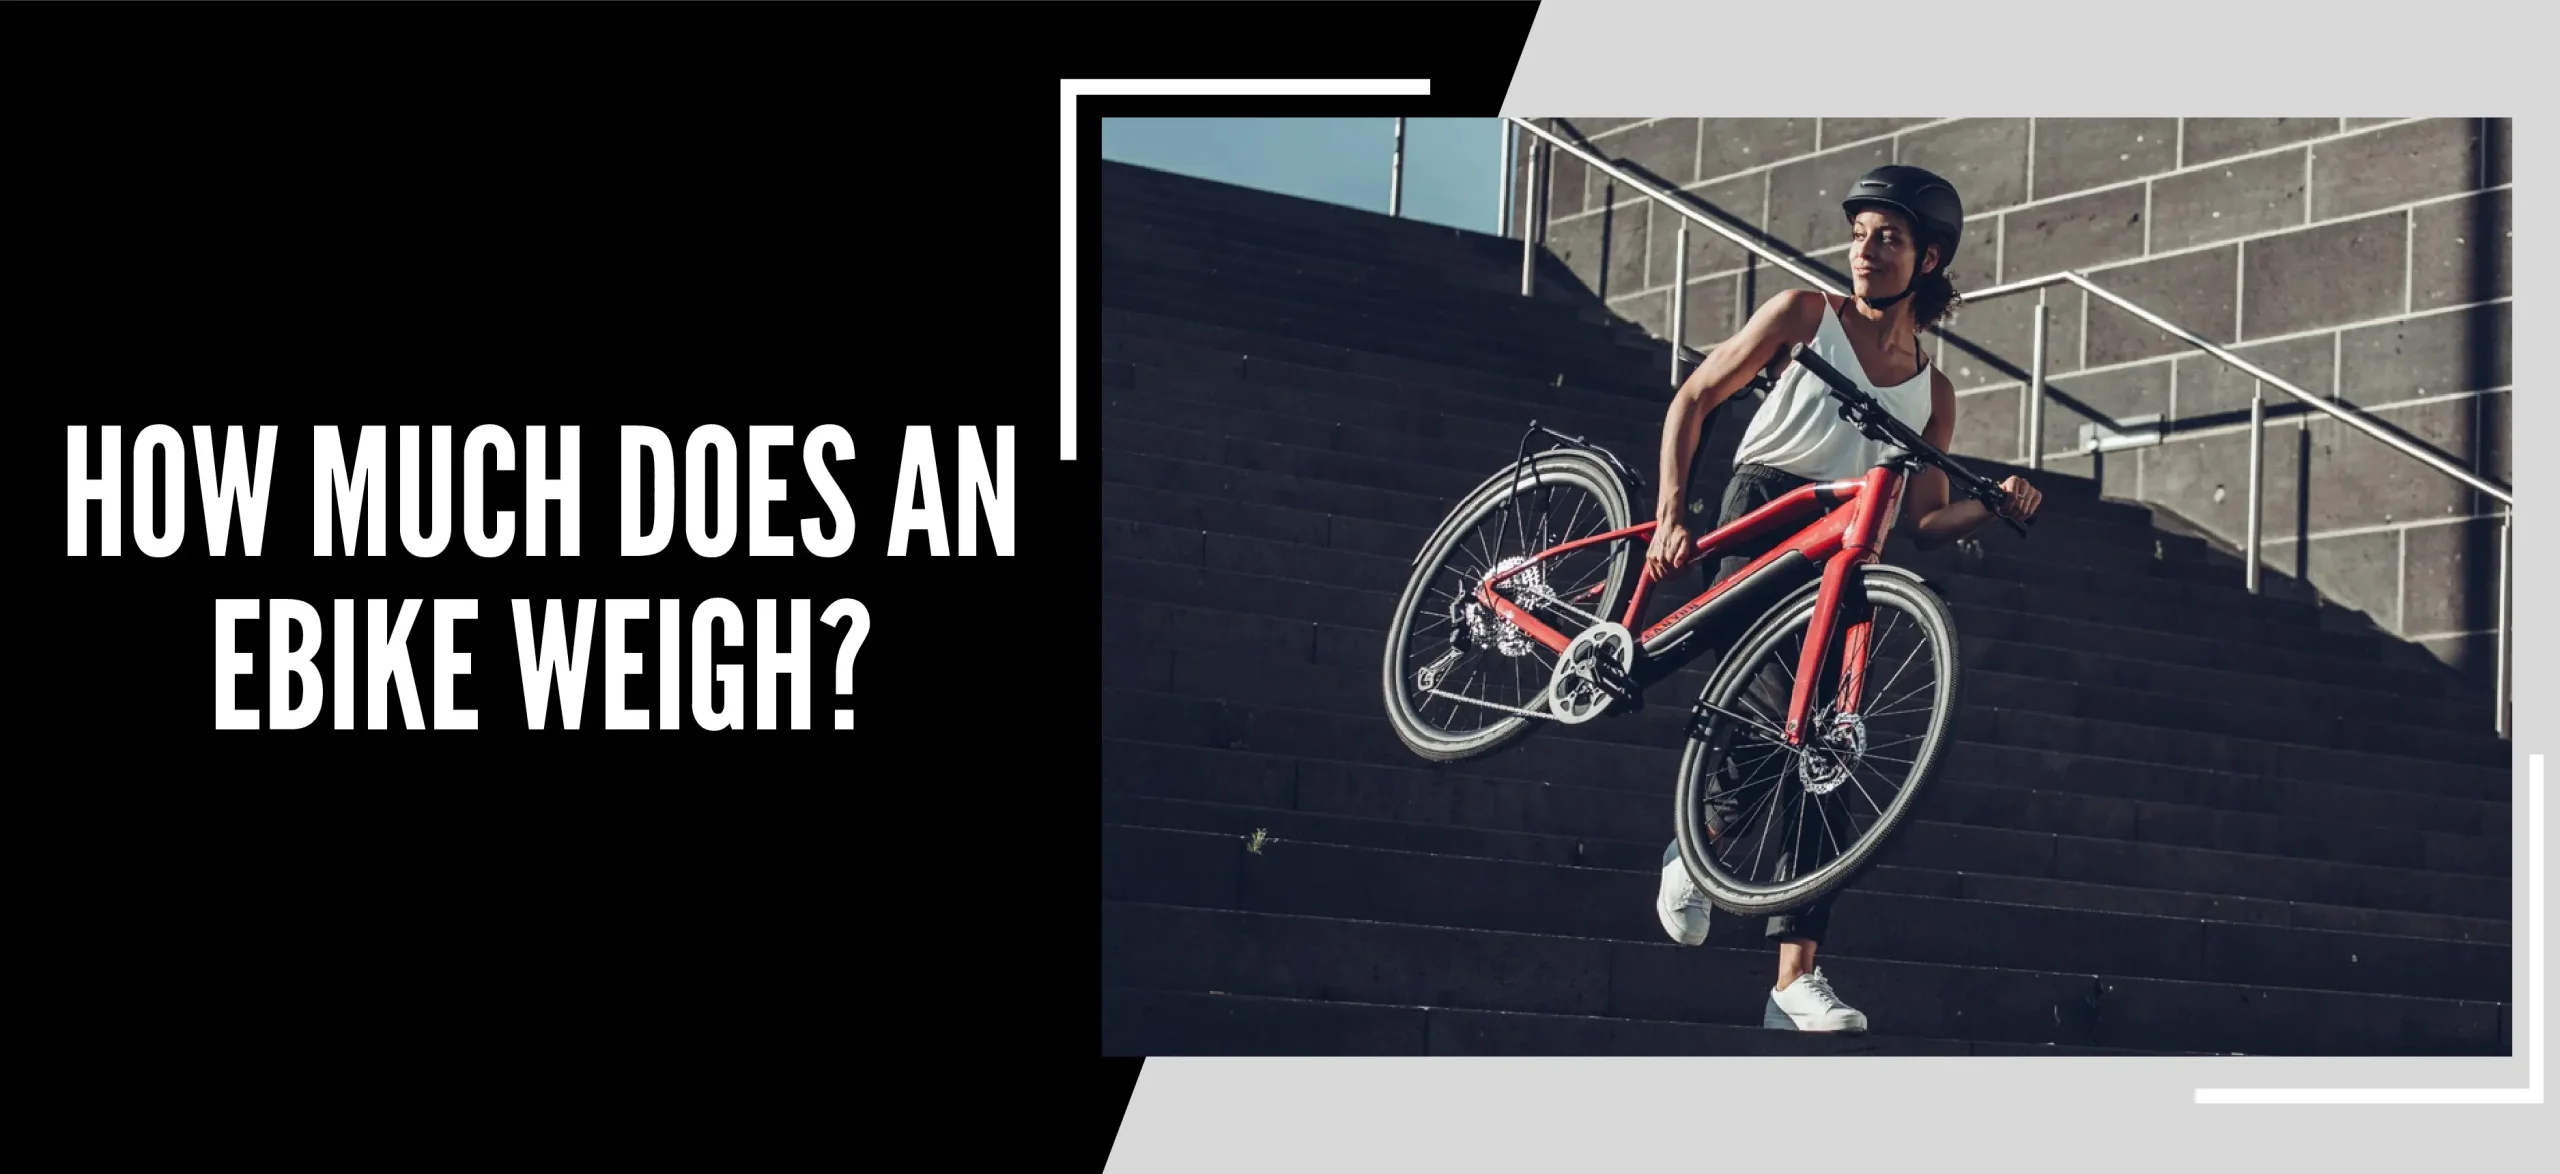 How Much Does An EBike Weigh?